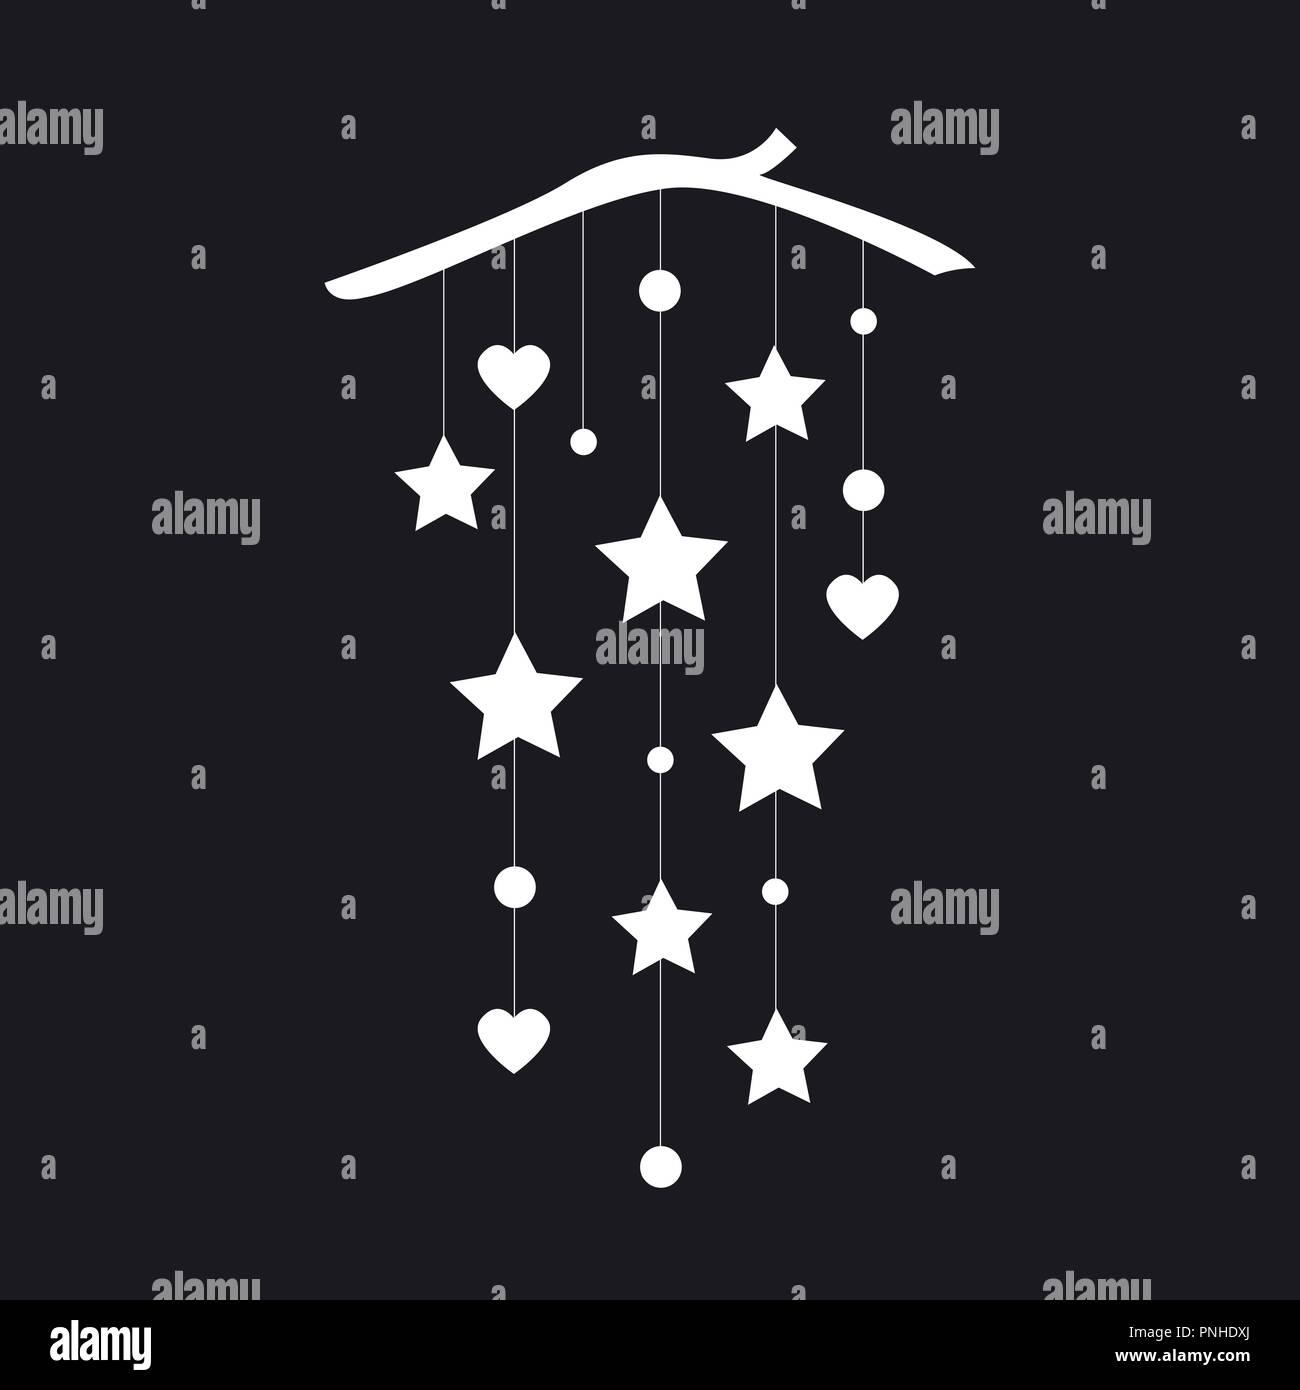 Simple and elegant wall hanging banner with stars, hearts, and circles. Everyday or Christmas decor. Cute interior decor from branch, rope, wood or pa Stock Vector